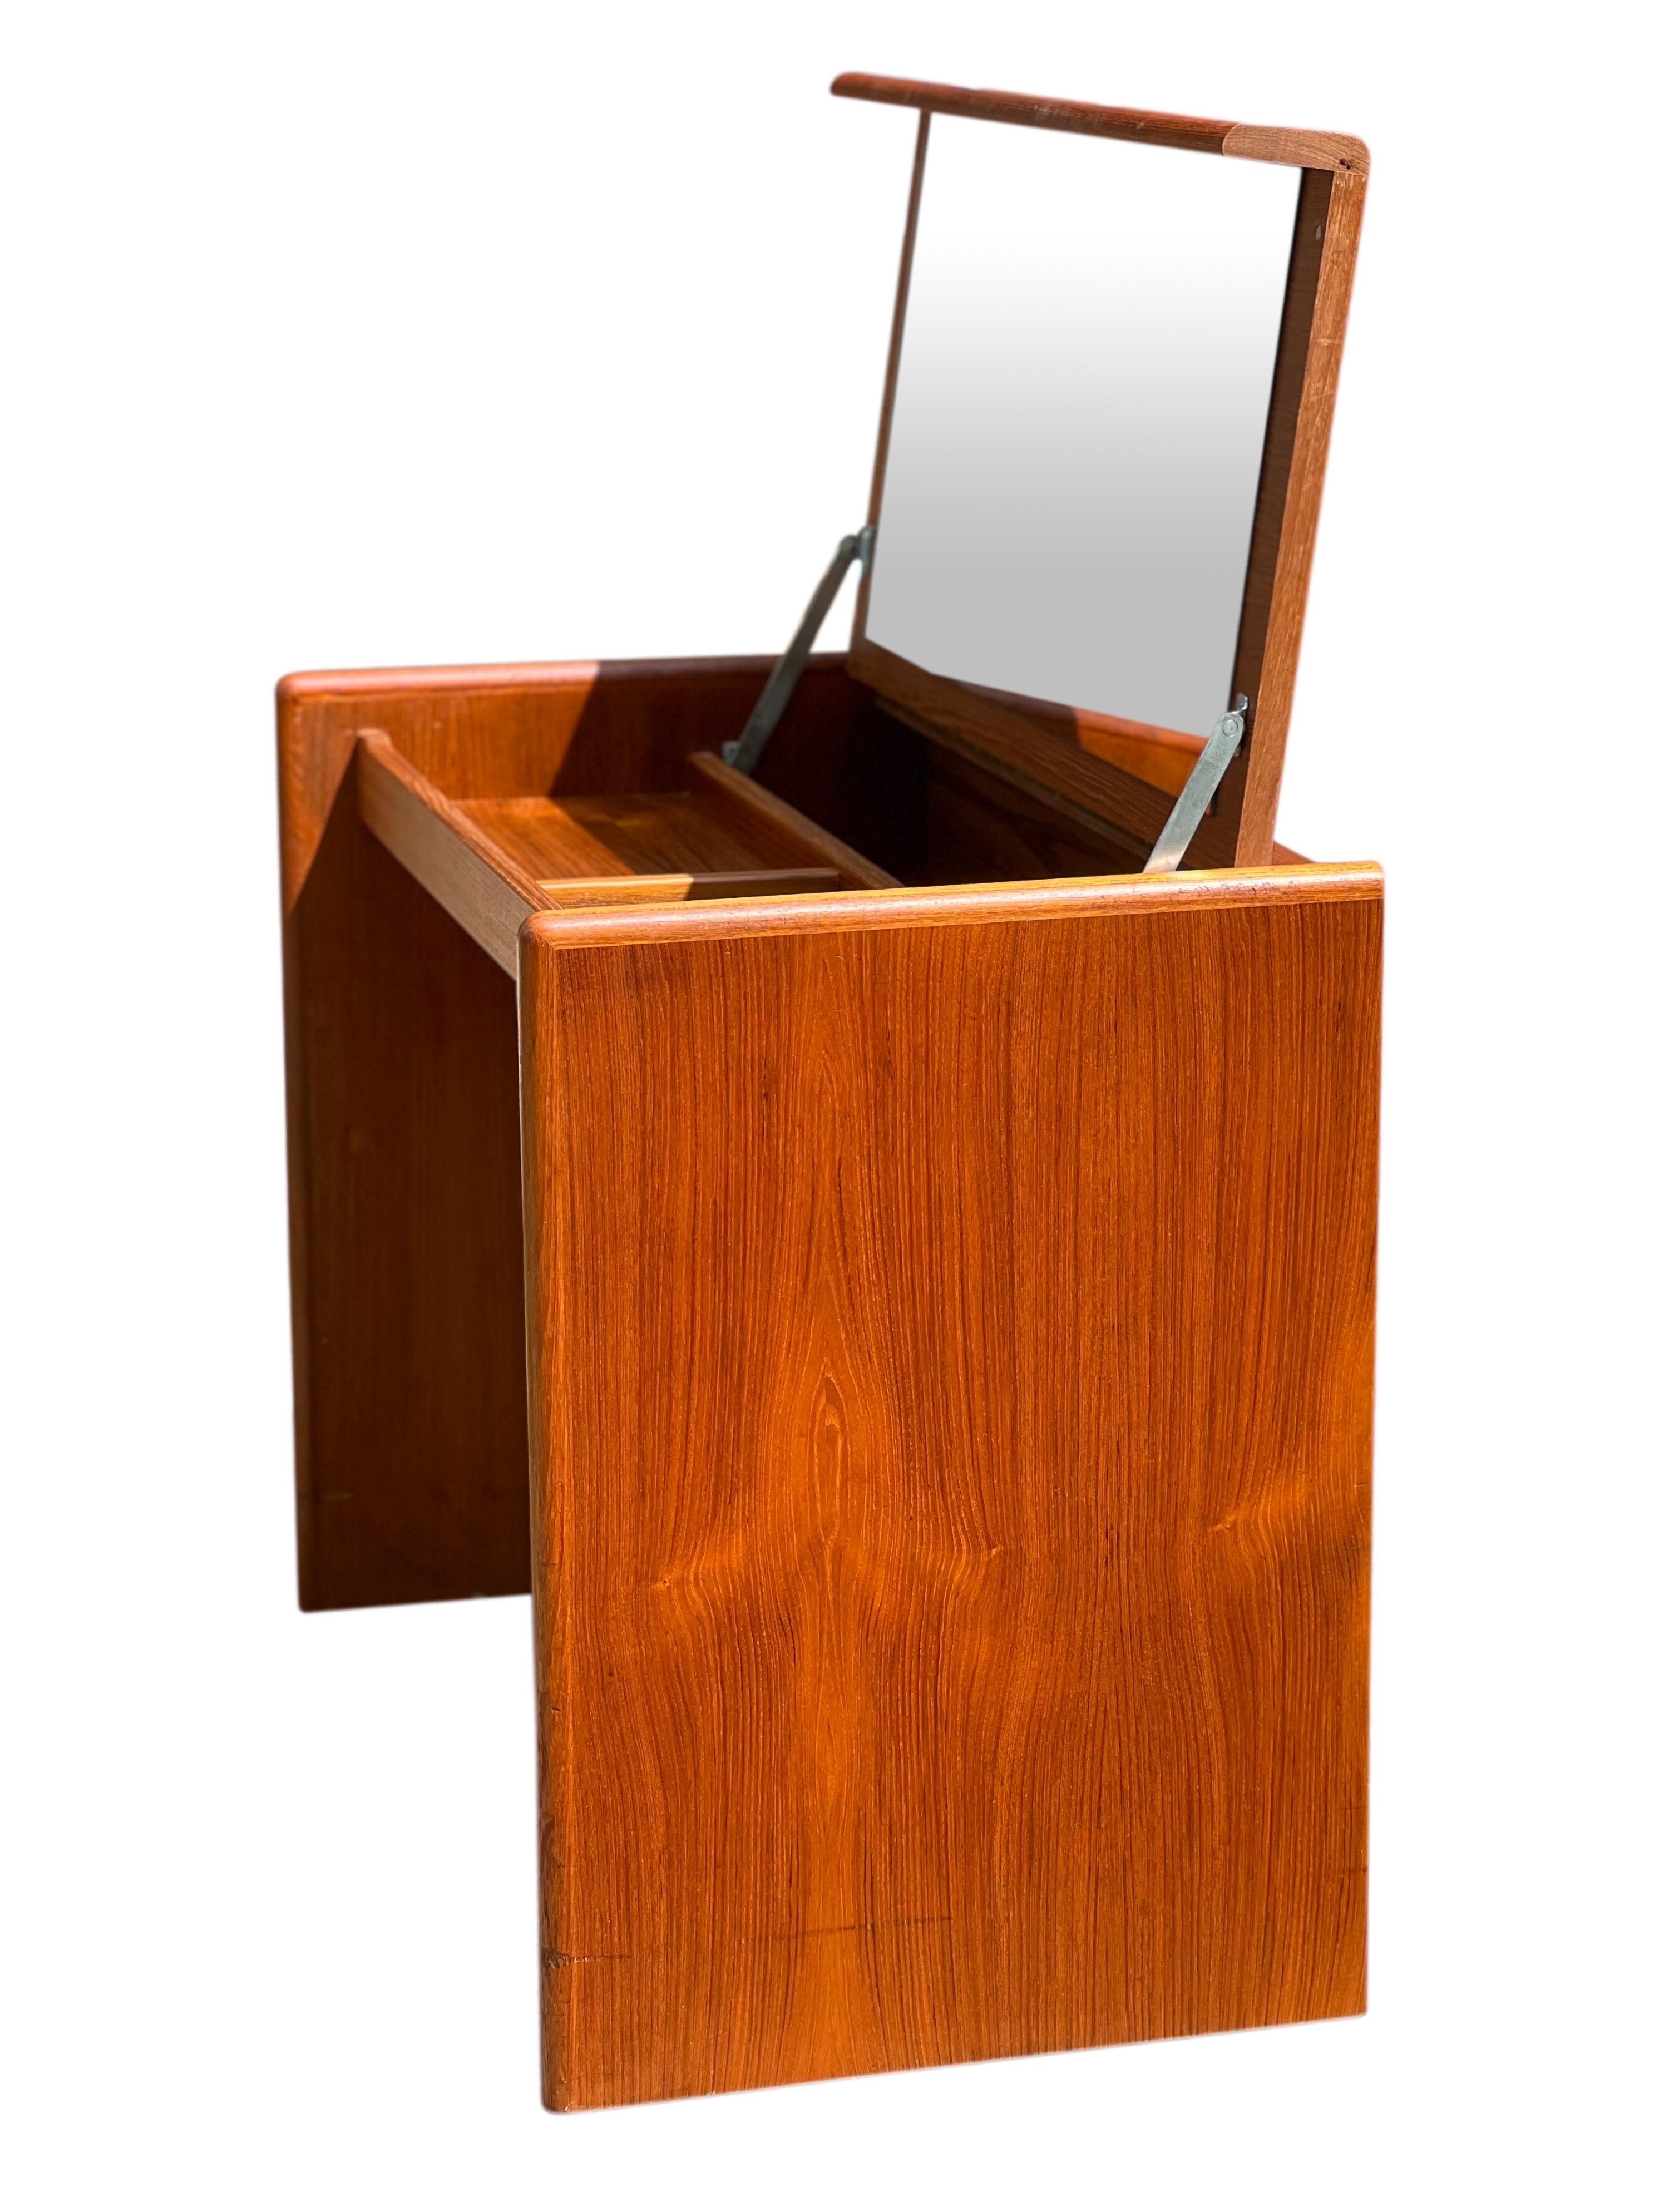 Fabulous mid-century Danish teak Vanity with flip open top.

The vanity features a full piano hinge and a fantastic large, high quality mirror. Very sturdy and well-crafted, the vanity offers lots of useful, categorized storage space in pristine